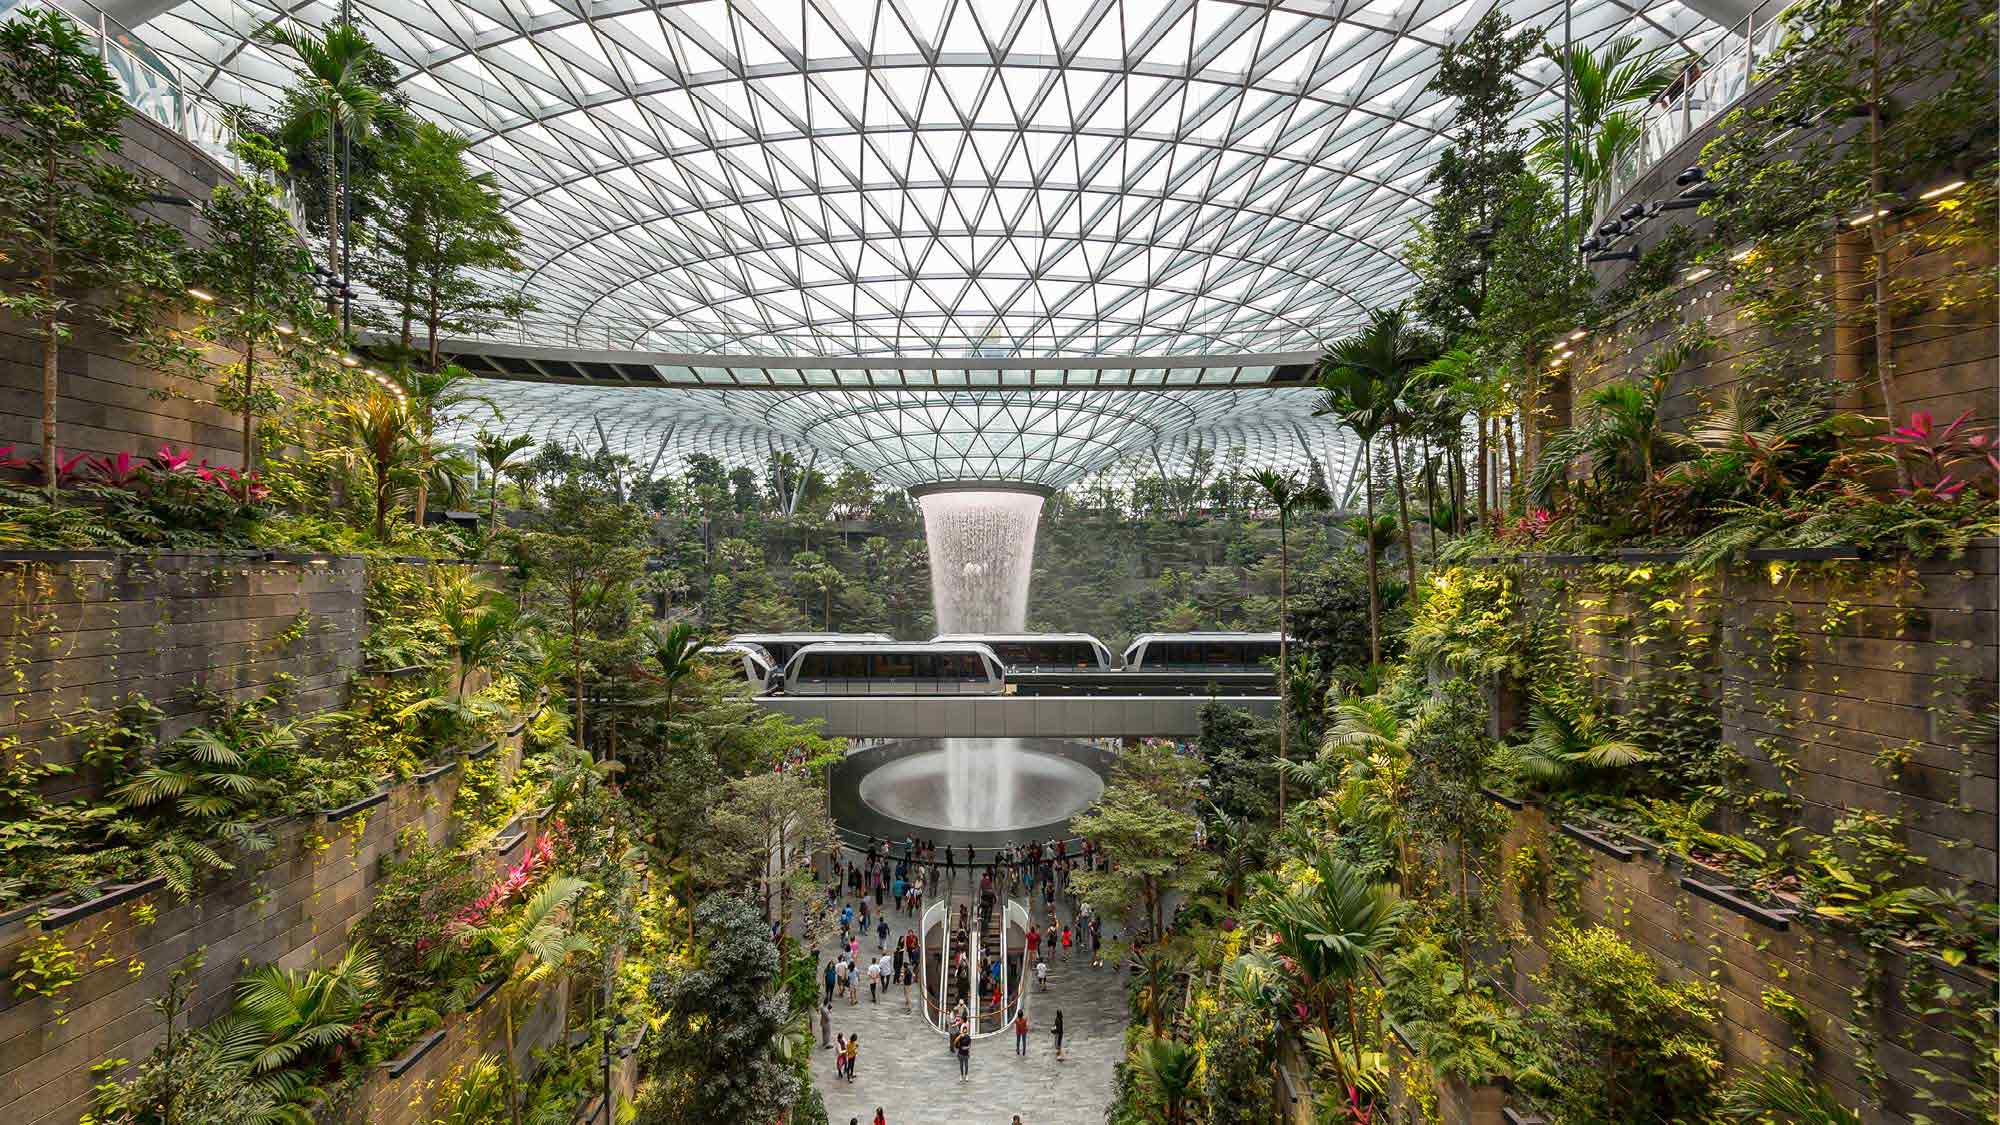 Flying out of Changi Airport? You'll have to pay extra charges and fees